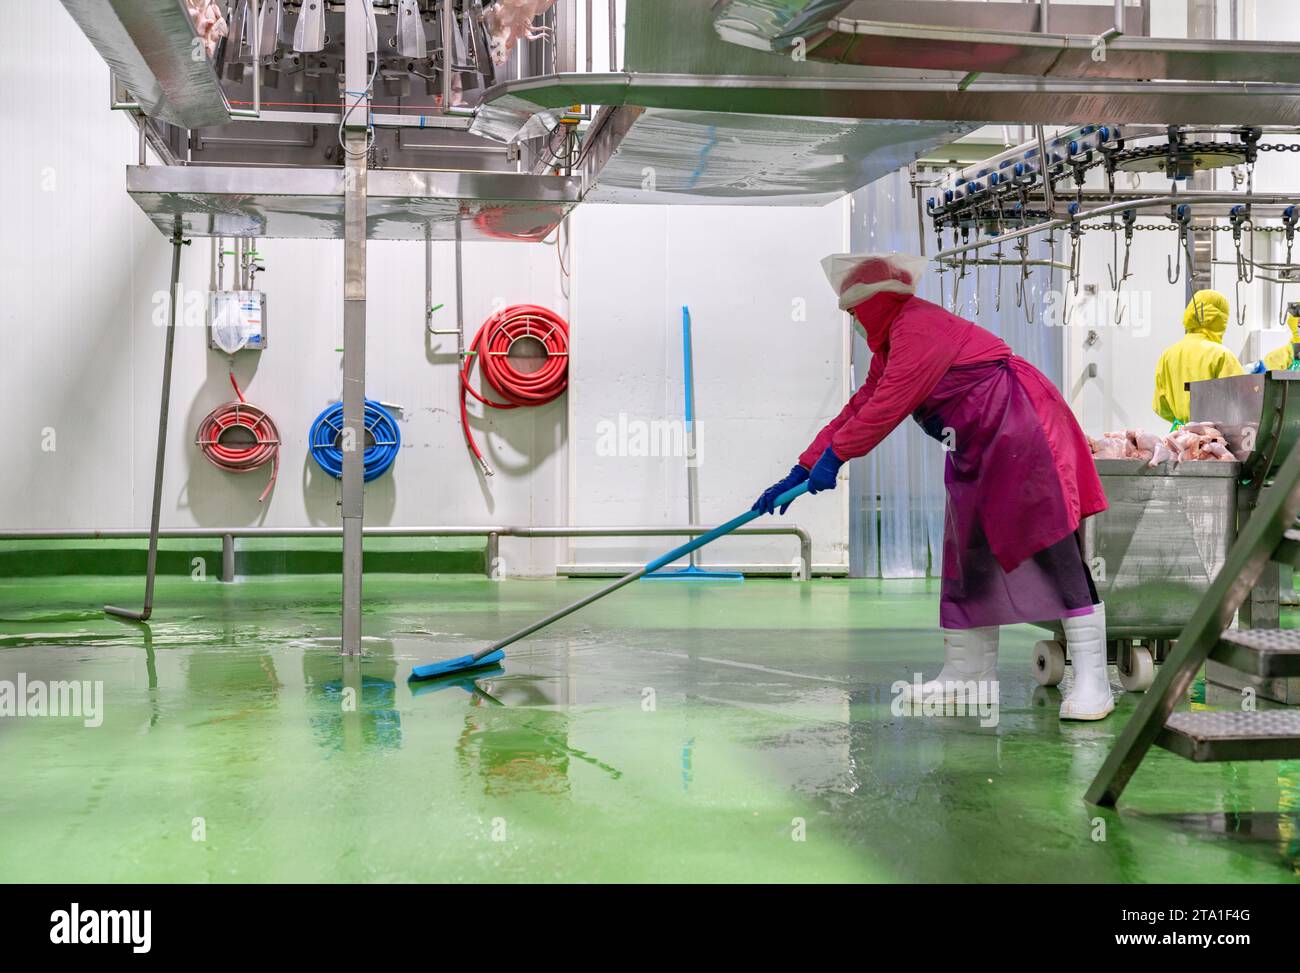 Hygiene officer cleaner in protective uniform cleaning floor of food processing plant. Cleaning services. Stock Photo